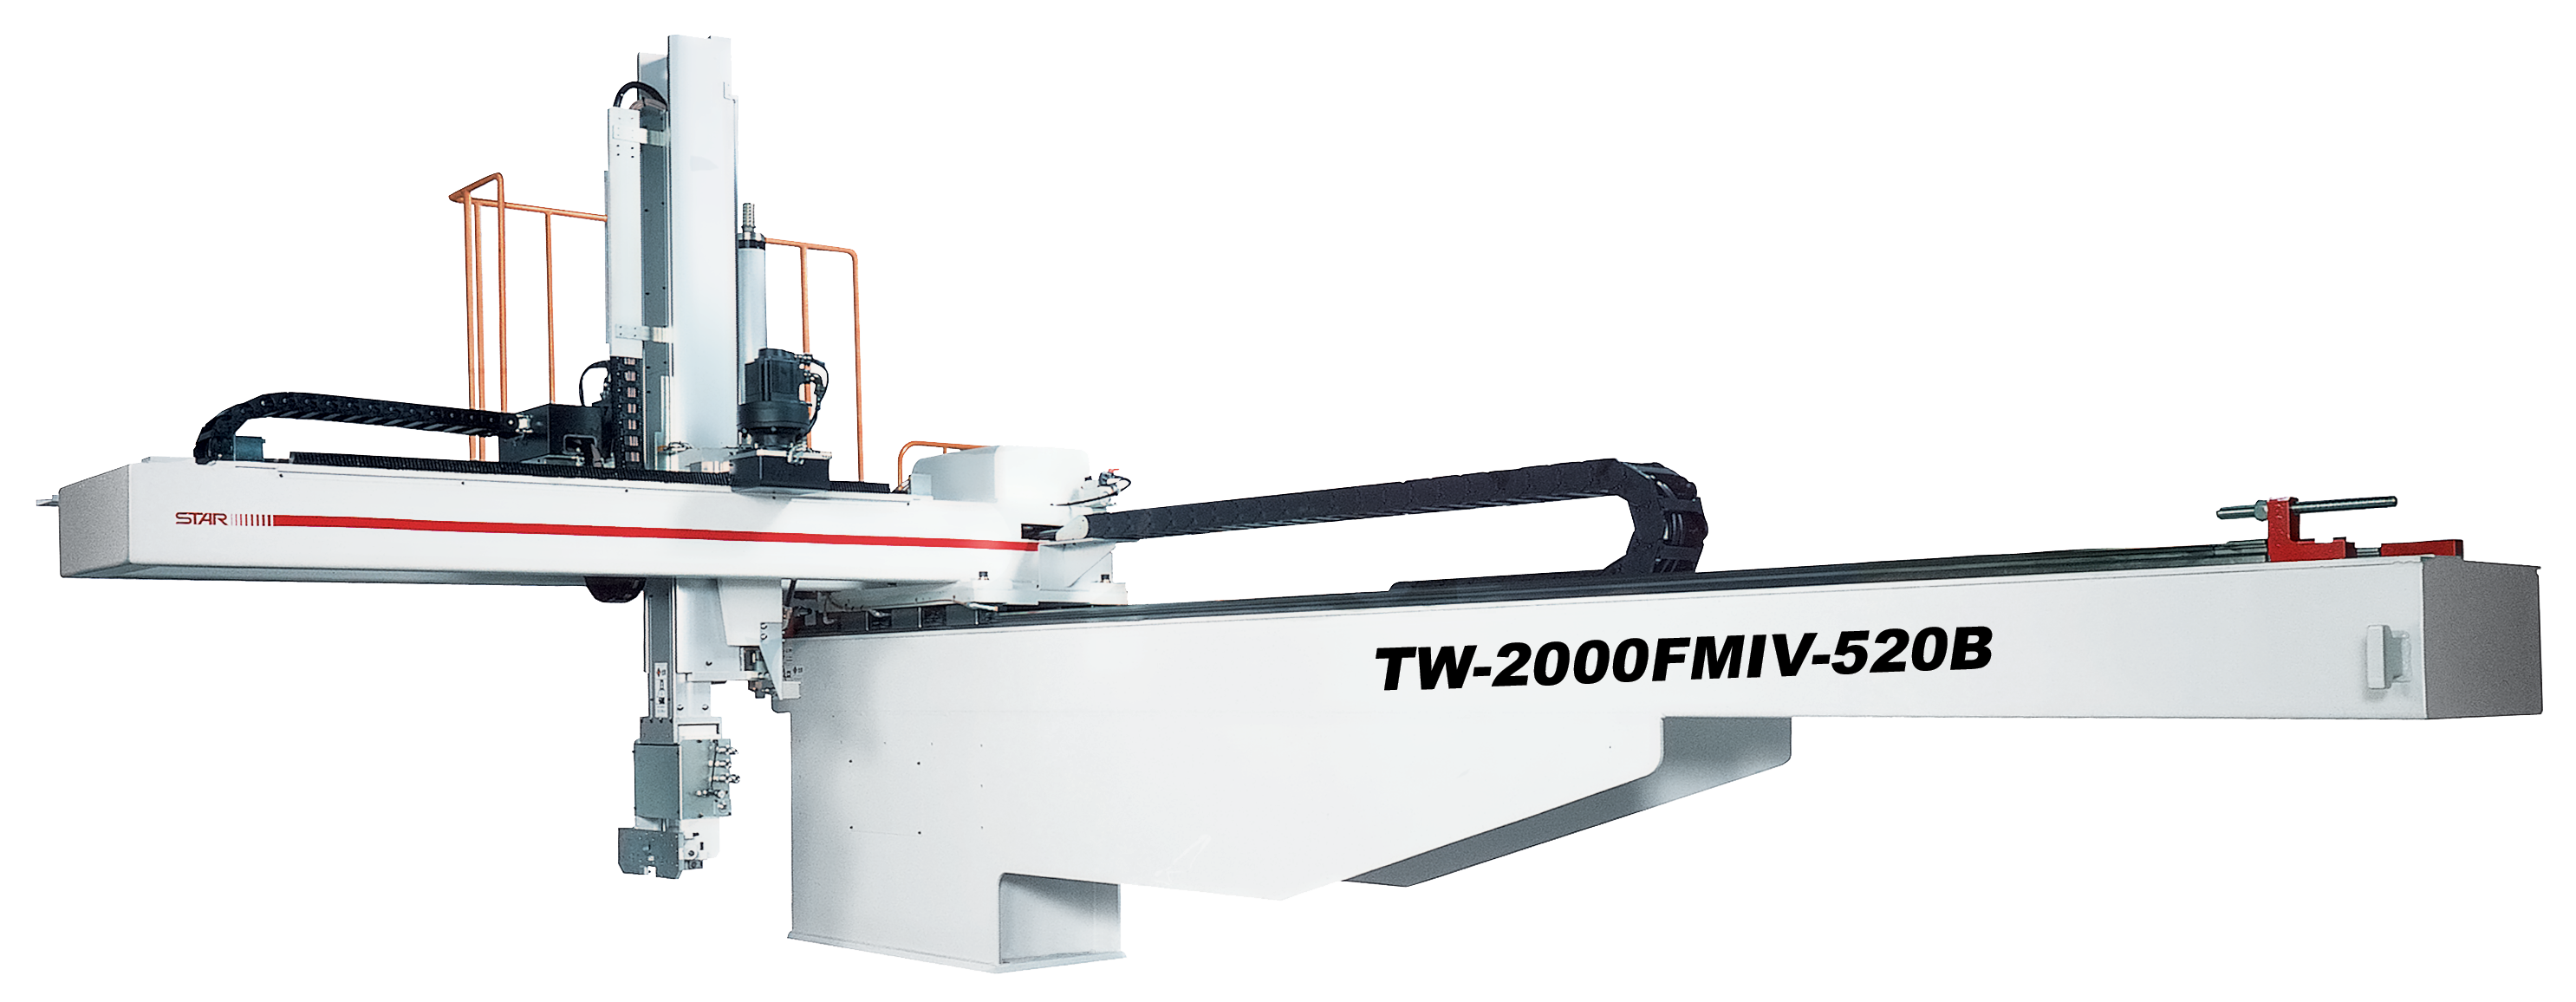 TW-2000 FMIV Injection molding robot by Star Automation